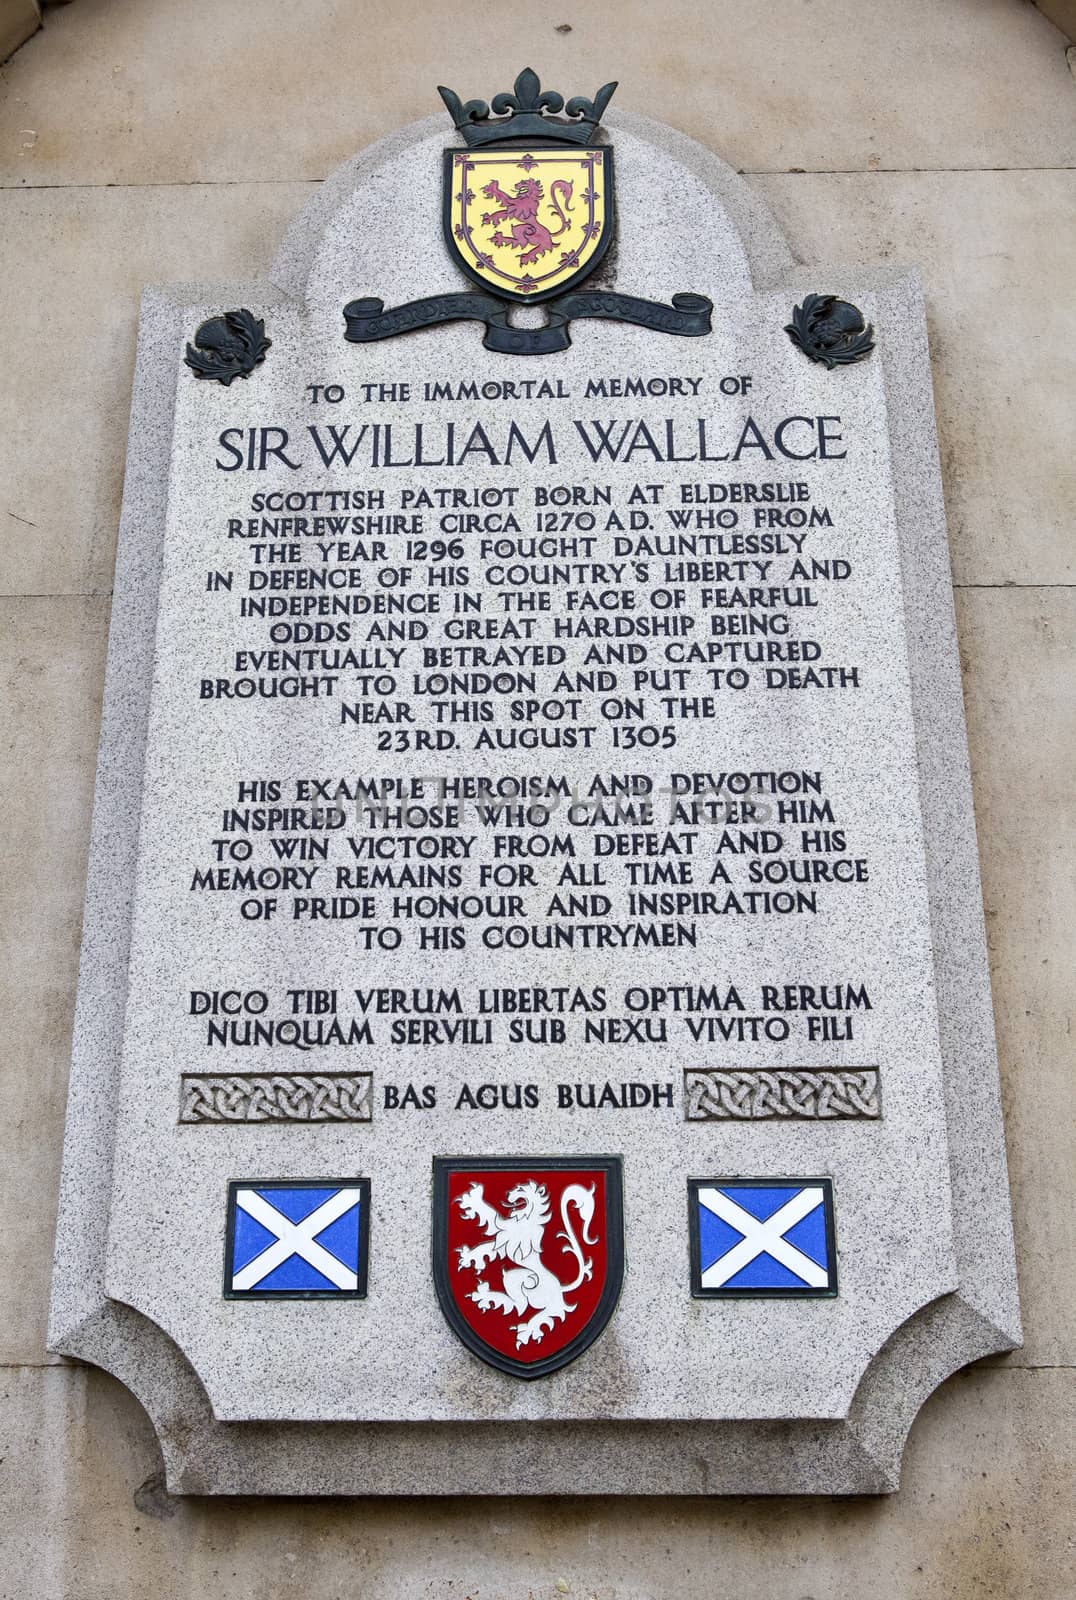 Sir William Wallace memorial plaque on the wall of St.Bartholomews Hospital in Smithfield, London - the location of his execution in 1305.